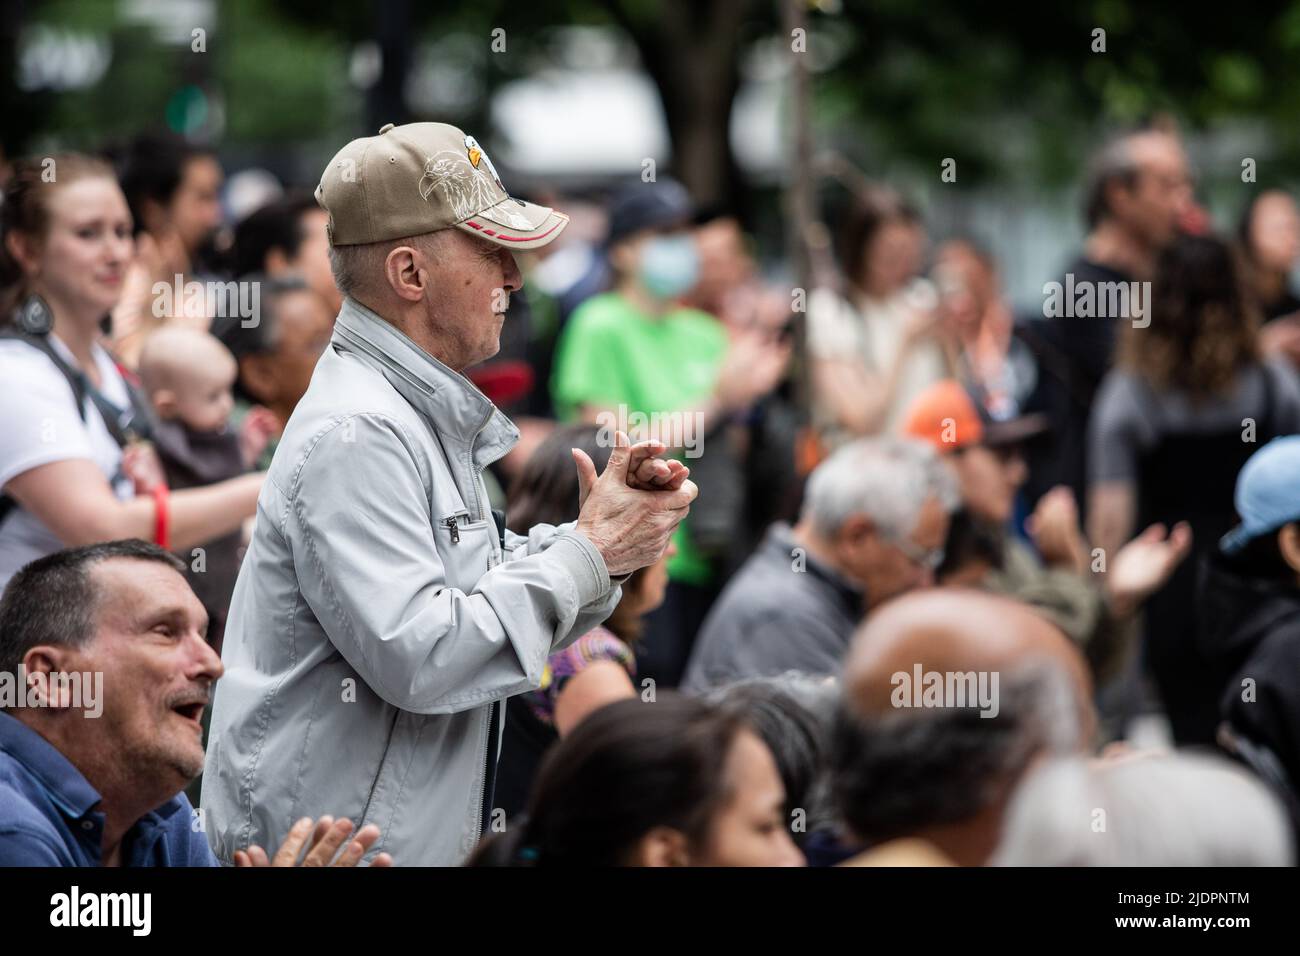 Indigenous community members attend the concert to celebrate National Indigenous Peoples Day. Stock Photo